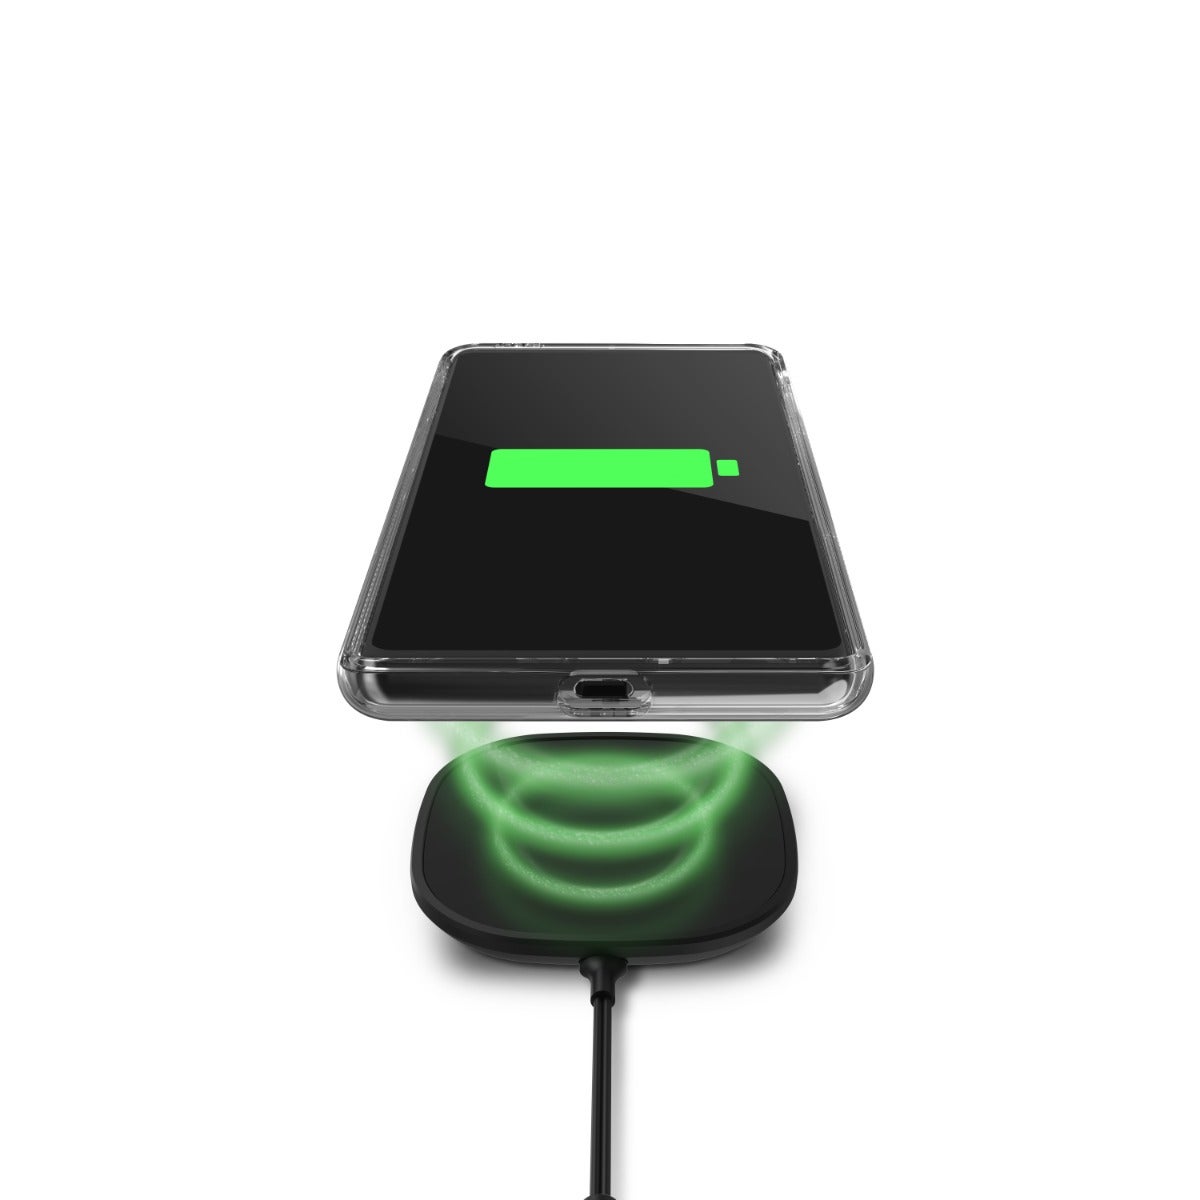 Wireless Charging Compatible||Milan is compatible with most wireless chargers.